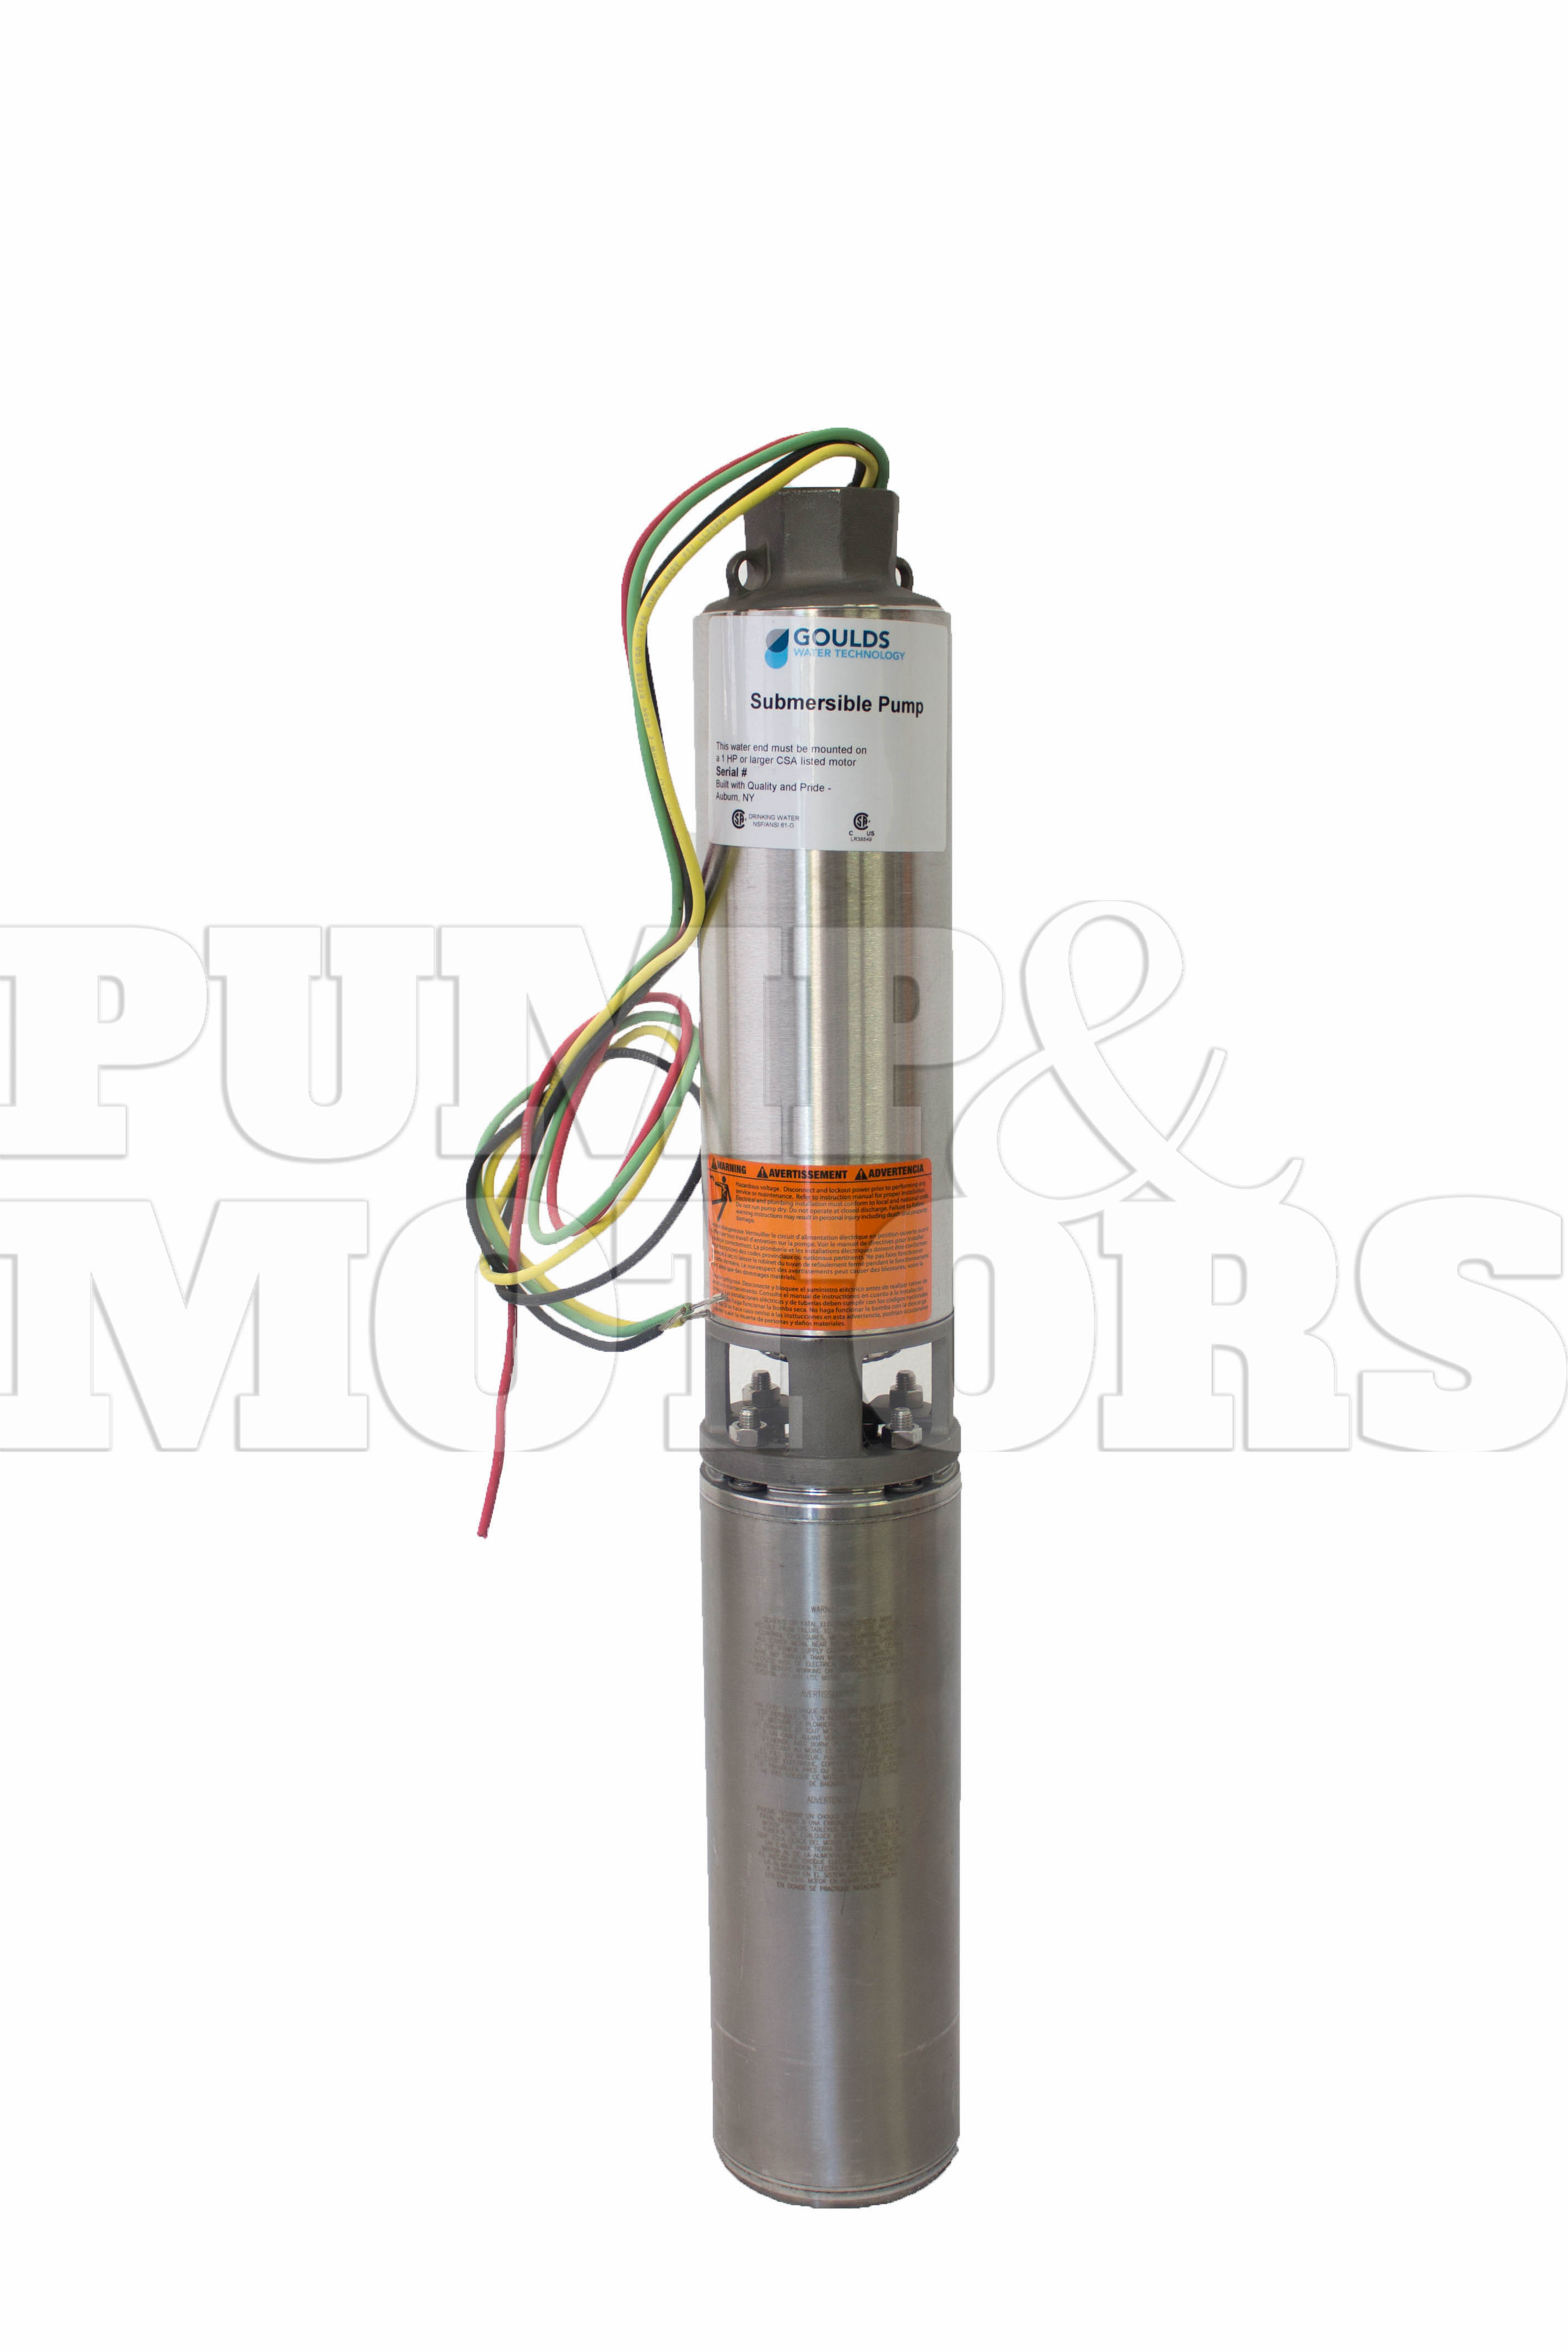 Goulds 55GS30412CL 3 HP 230V Submersible Water Well Pump 55GPM